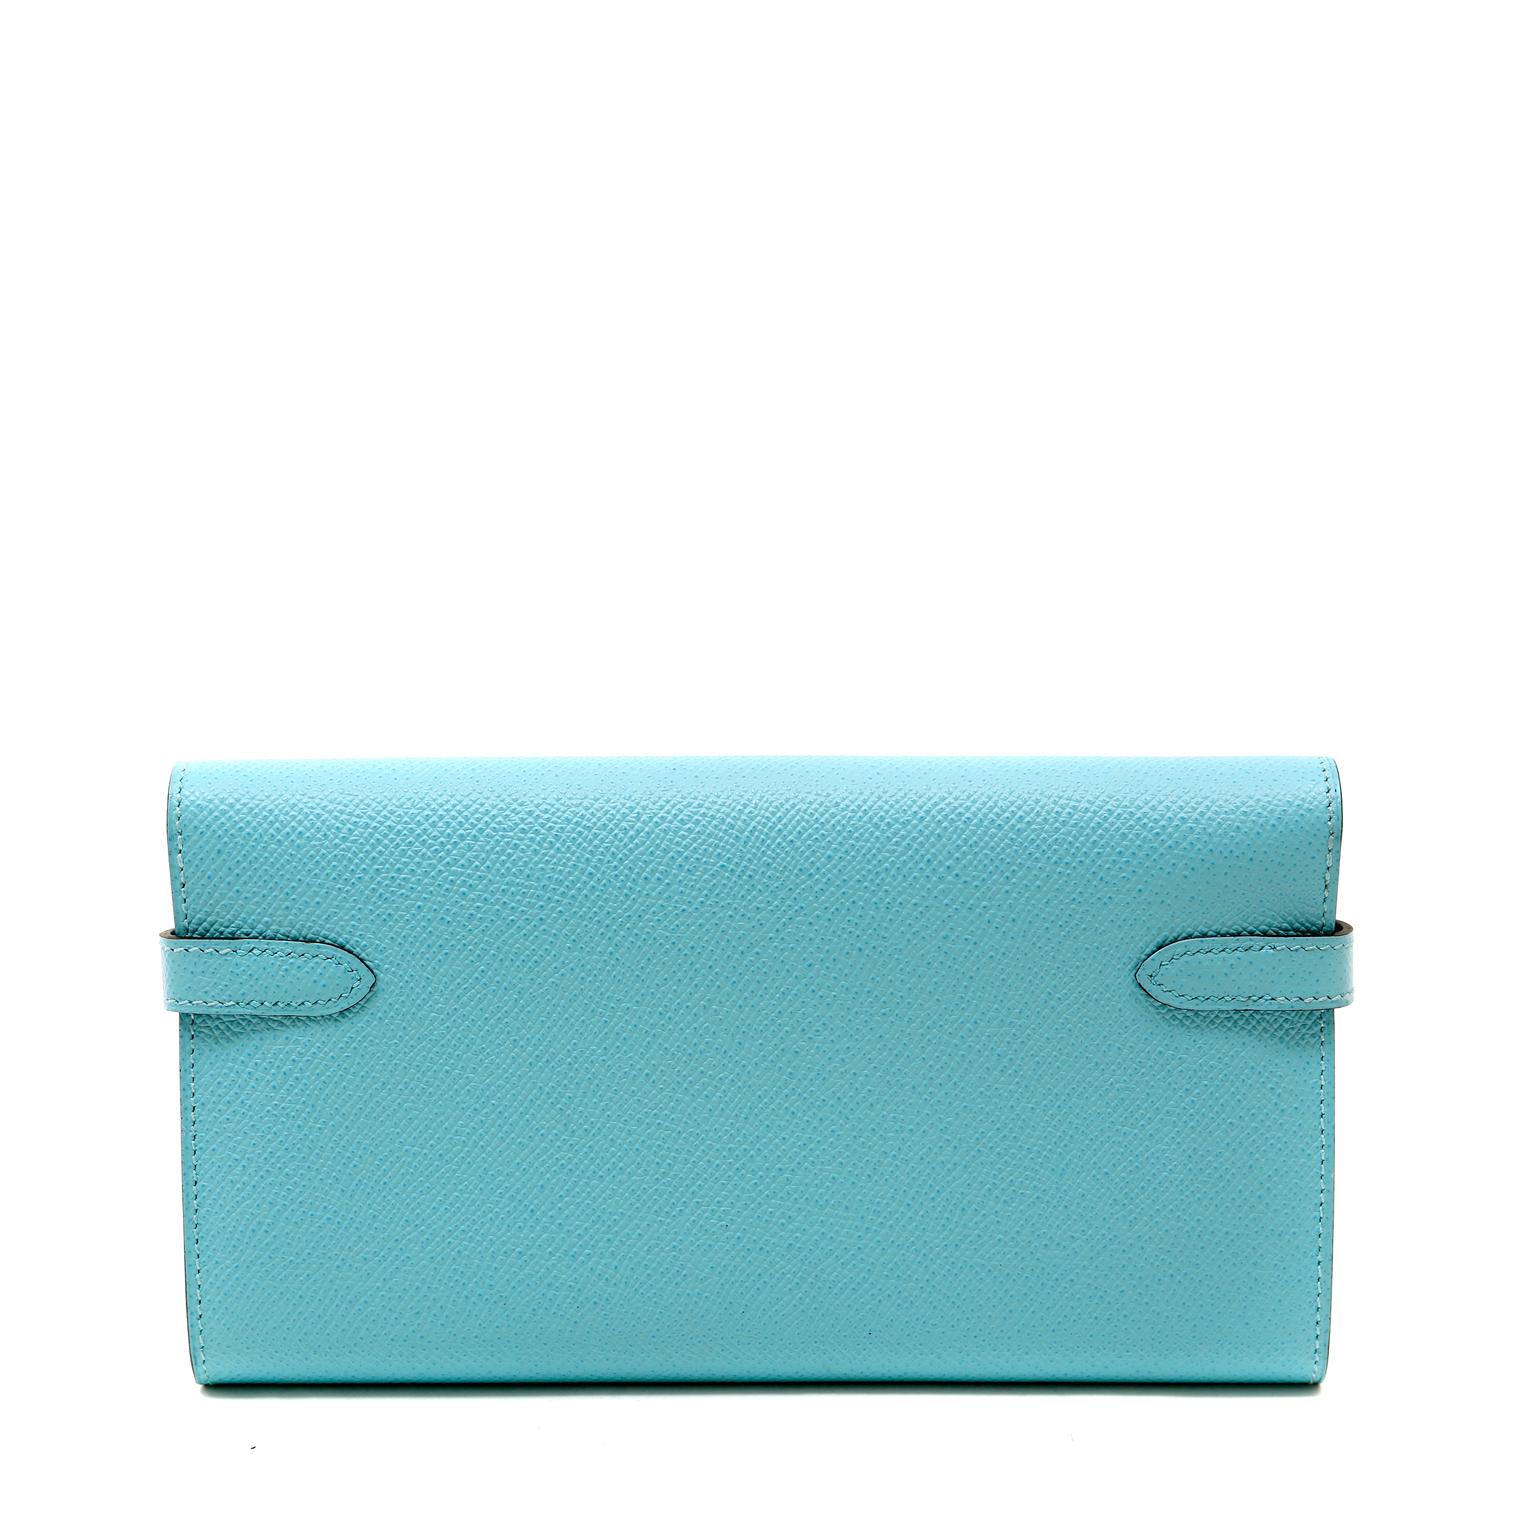 This authentic Hermès Tiffany Blue Epsom Kelly Wallet is in pristine unworn condition.  The perfect companion to organize cards, currency and coinage, the Classic Kelly Wallet is chic and functional.
Lovely Tiffany Blue Epsom leather is textured and